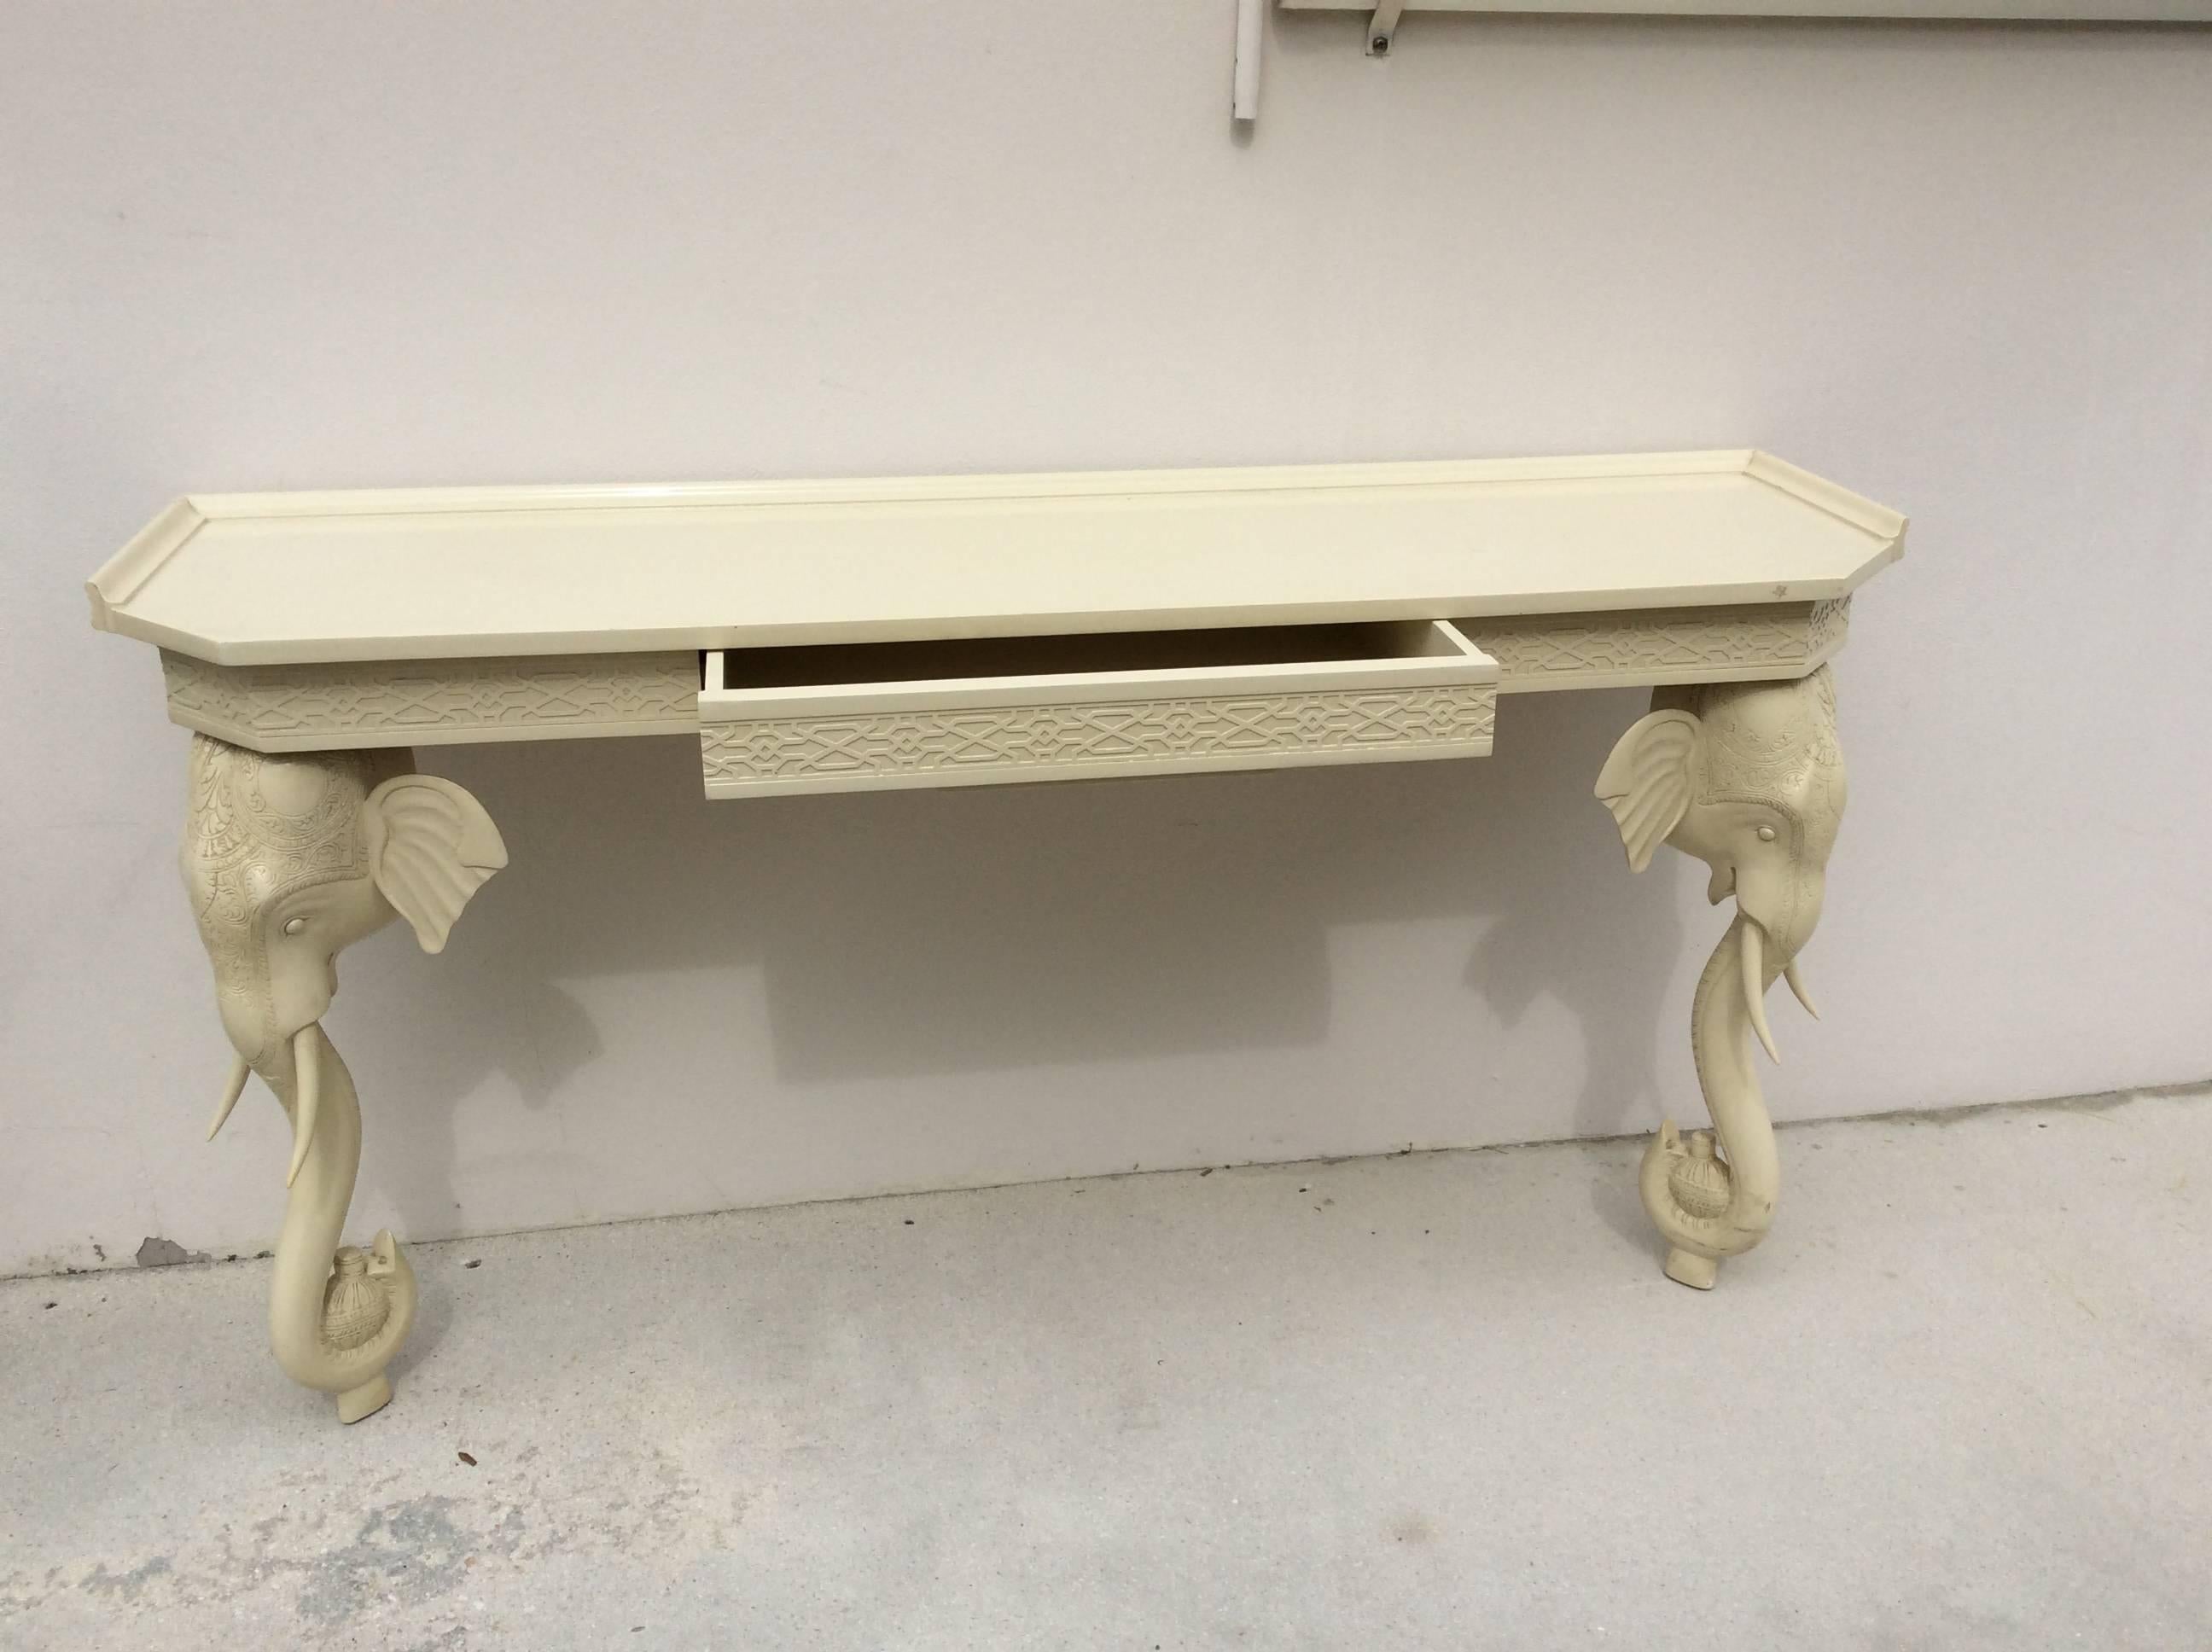 Hollywood Regency Vintage Gampel and Stoll Elephant Wall Console Table Desk Fretwork Chinoiserie 